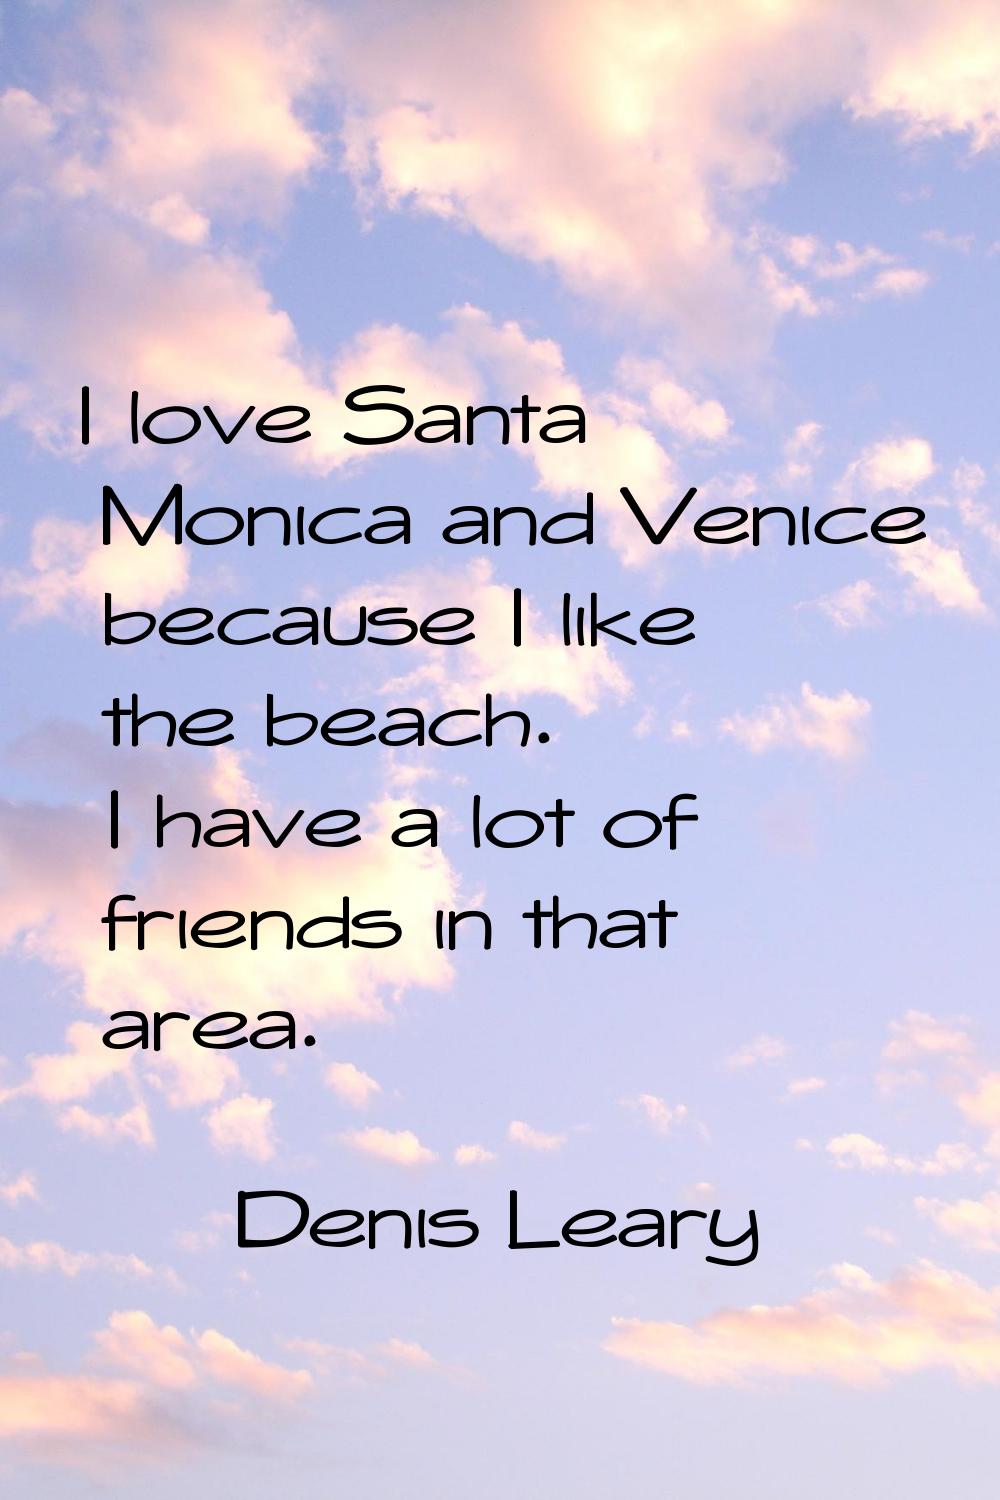 I love Santa Monica and Venice because I like the beach. I have a lot of friends in that area.